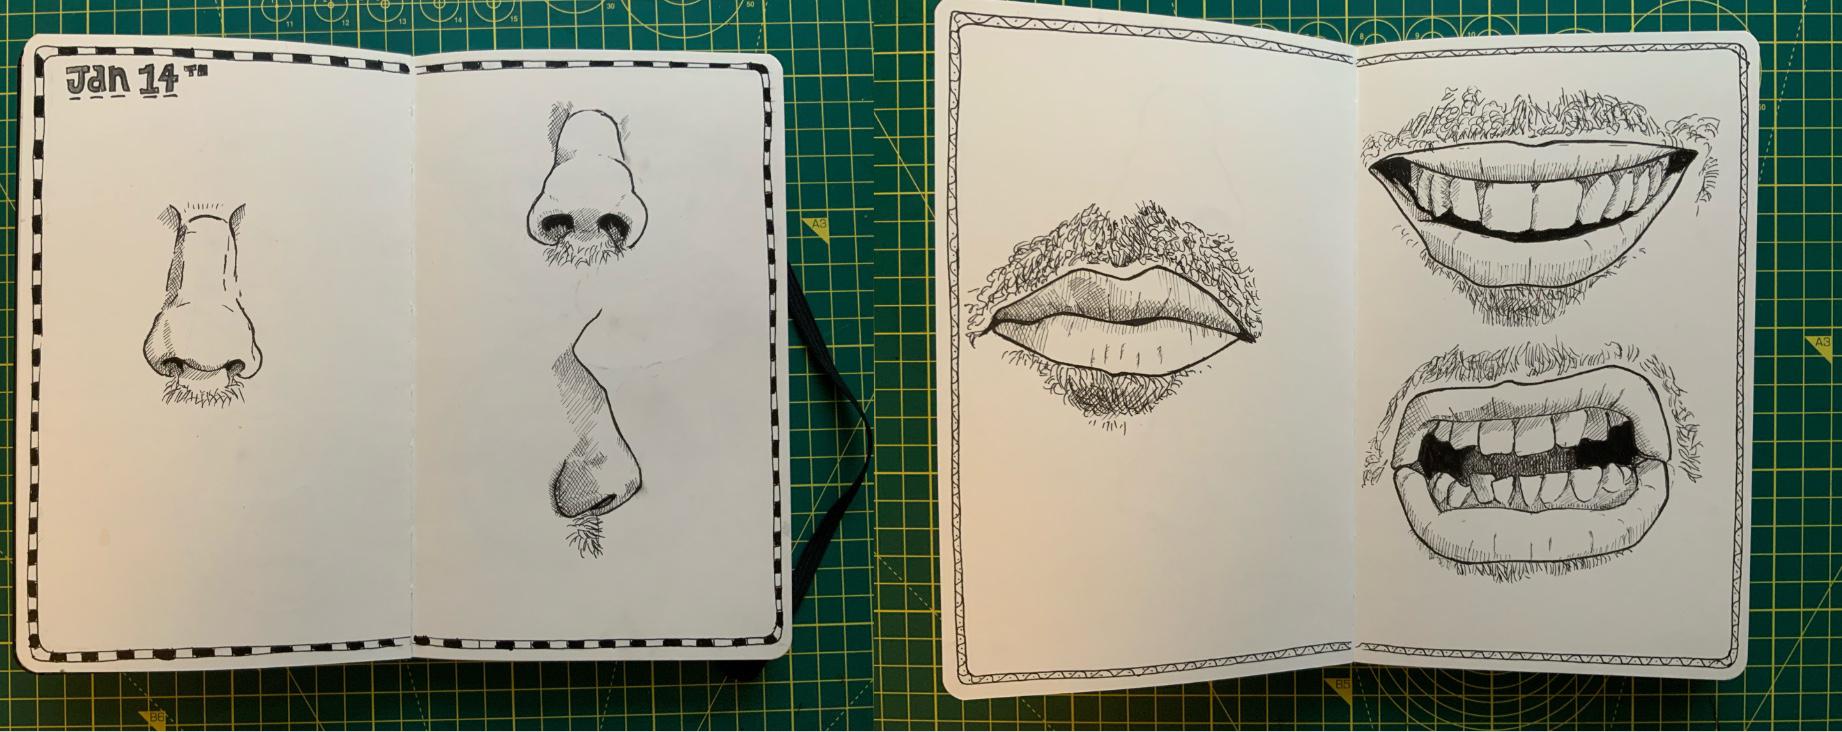 A drawing of a nose and mouth in black ink by Adam Westbrook